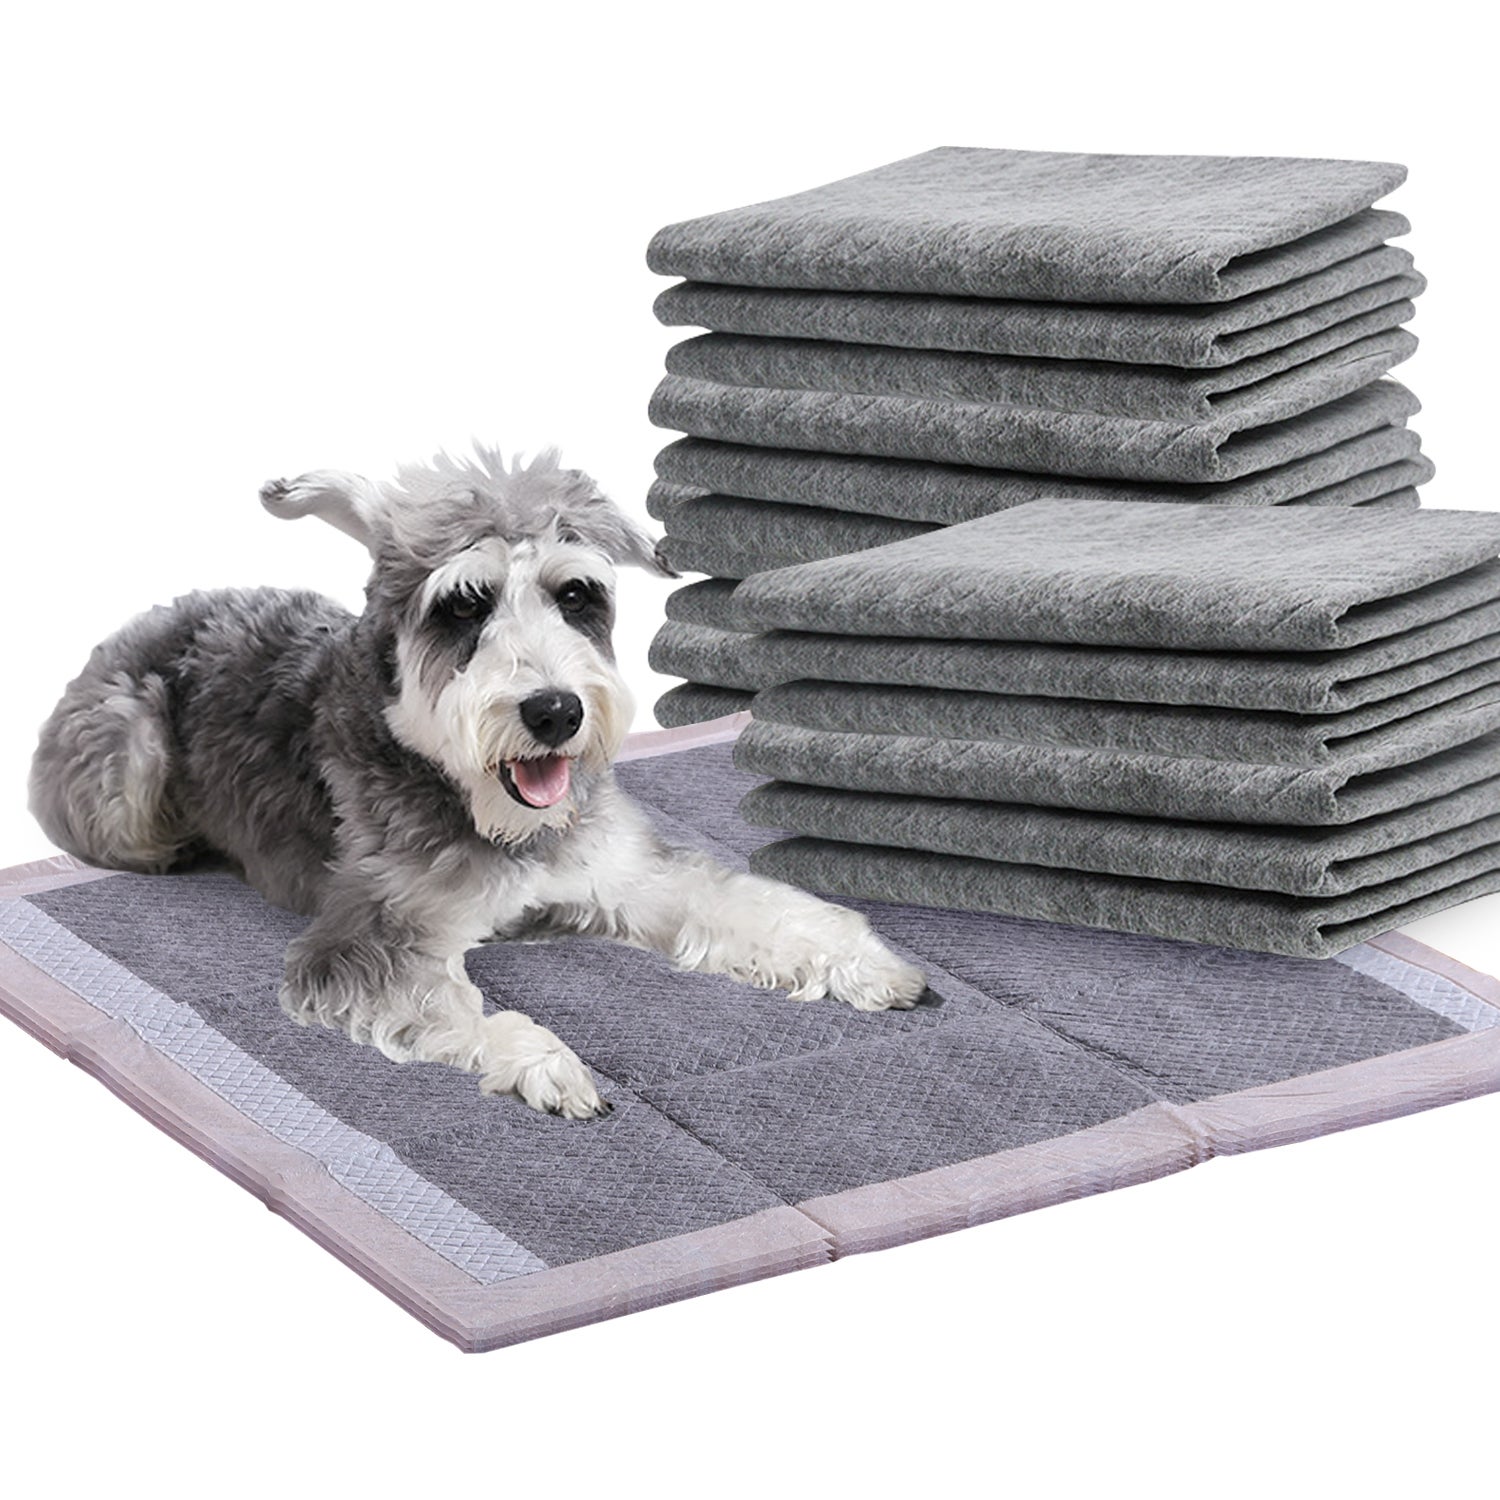 Pawz 200/400x Pet Toilet Training Pads Dog Puppy Pee Bamboo Charcoal Remove Odor